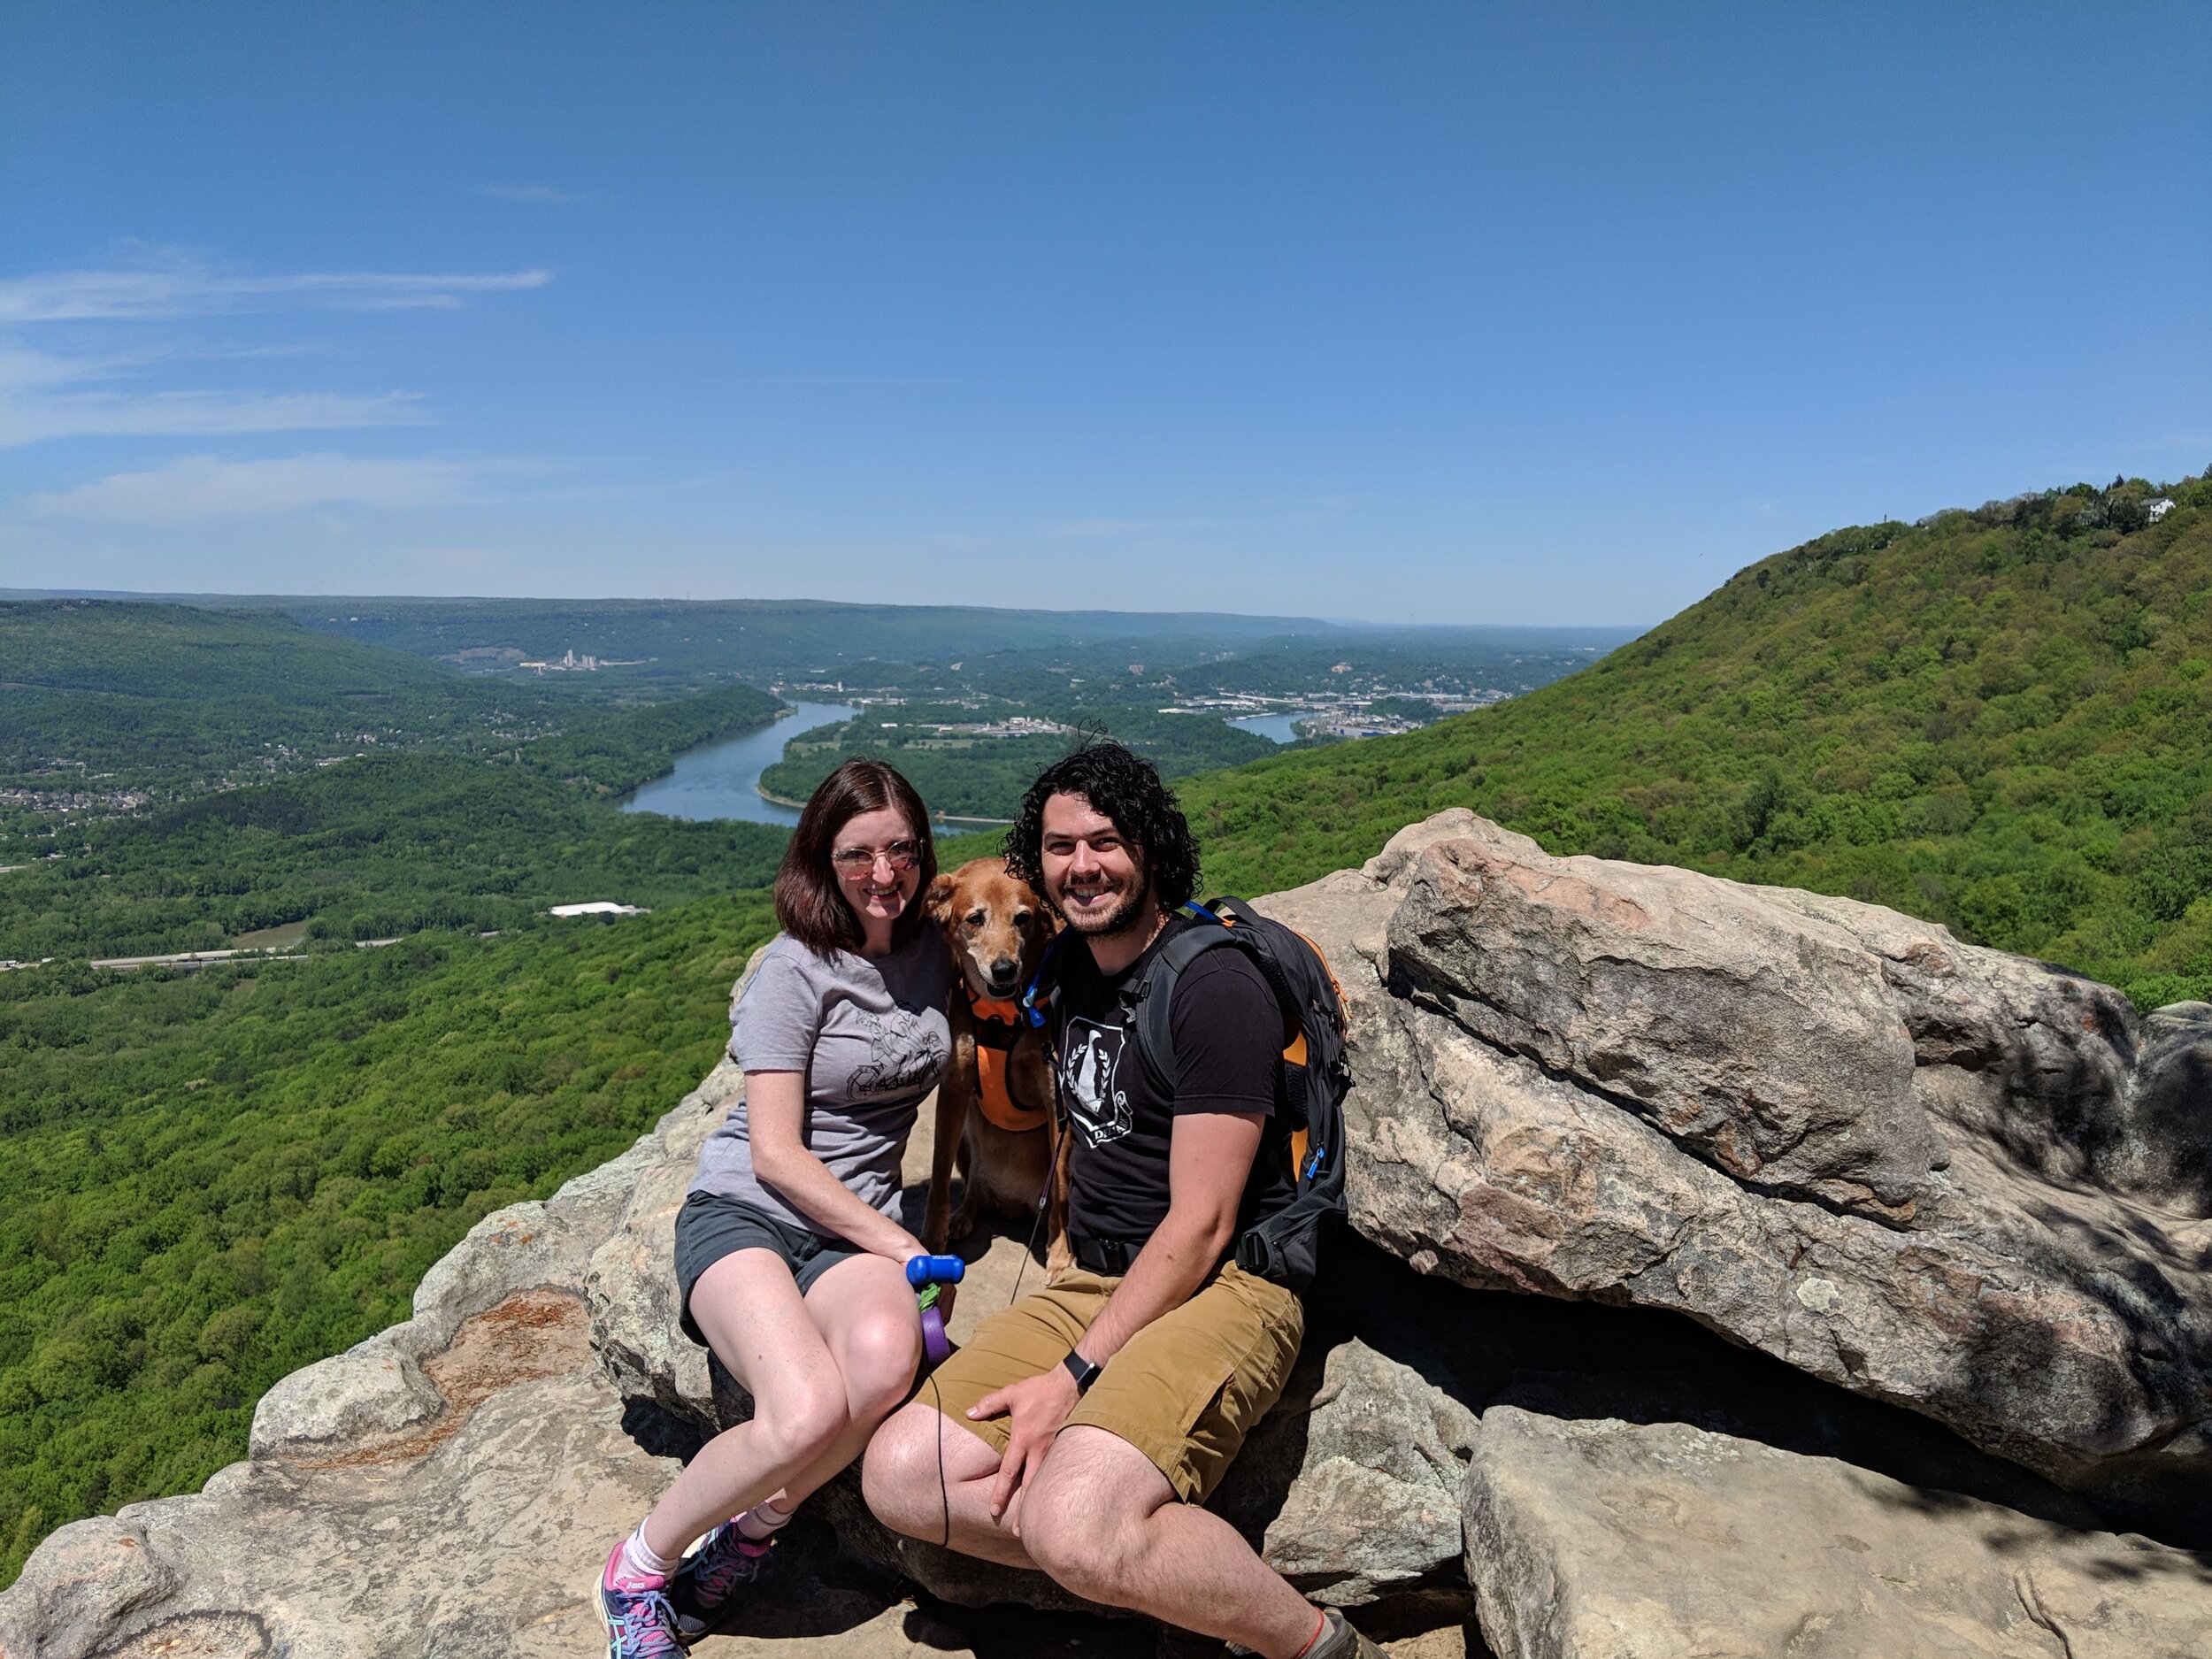  Made it to the top of Lookout Mountain! Chattanooga, TN 